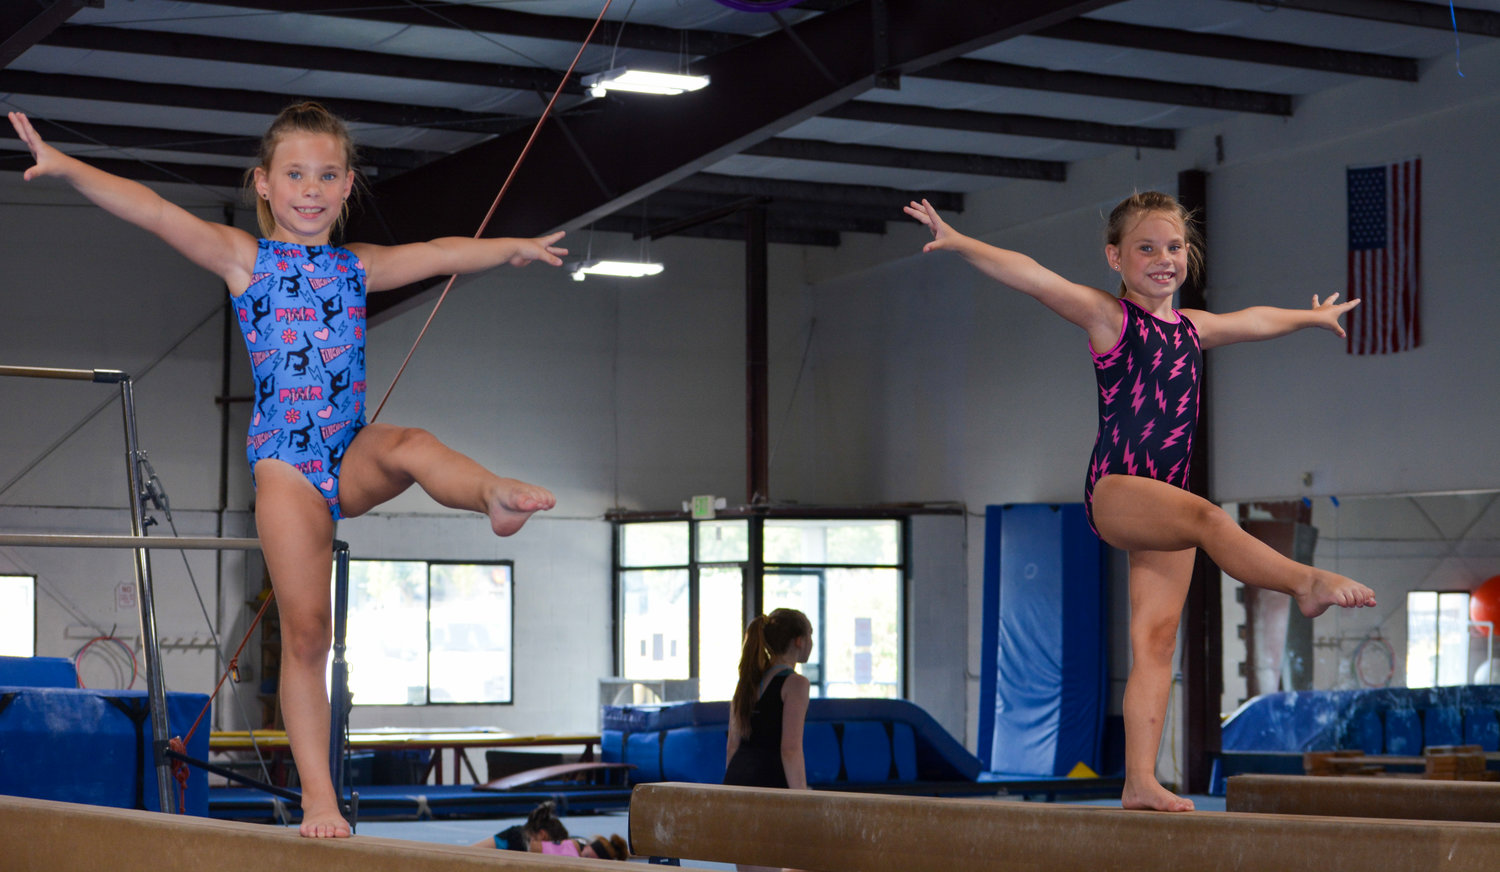 Twin sisters Jaycee and Reagan Davis started practicing gymnastics as 5-year-olds and were recently invited to participate in a competitive talent program.